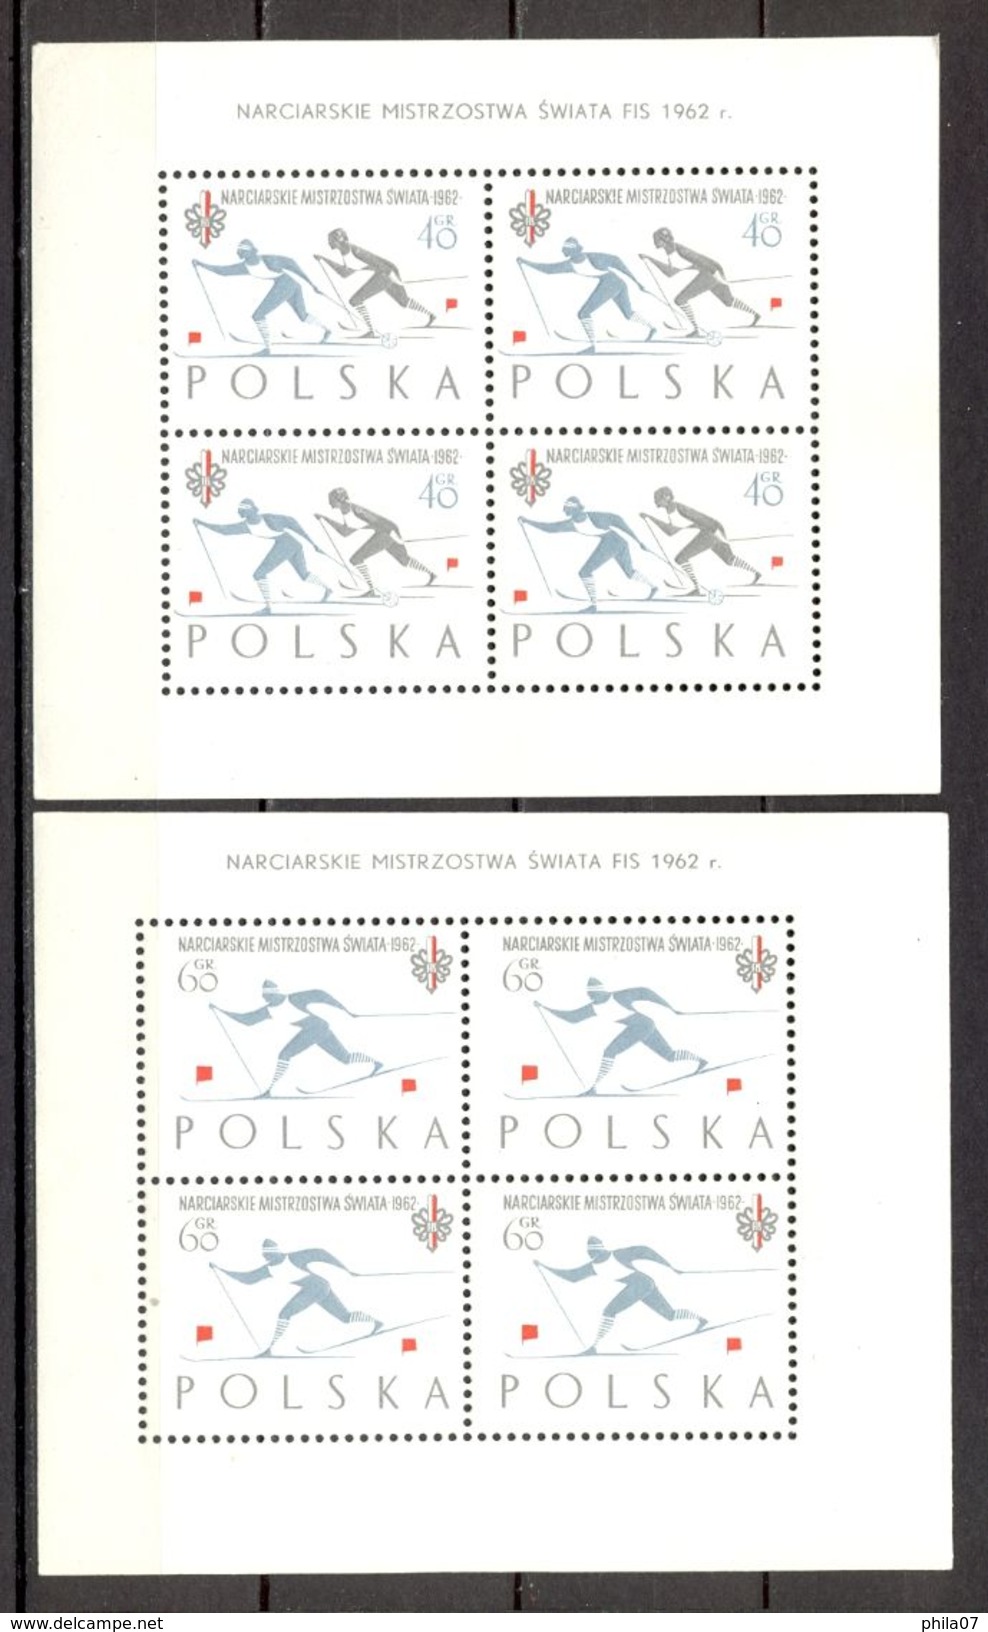 Poland - 1962, SWIATA FIS, Two Blocks, Sheet And Series, All MNH. / See Scans, 5 Scans - Unused Stamps